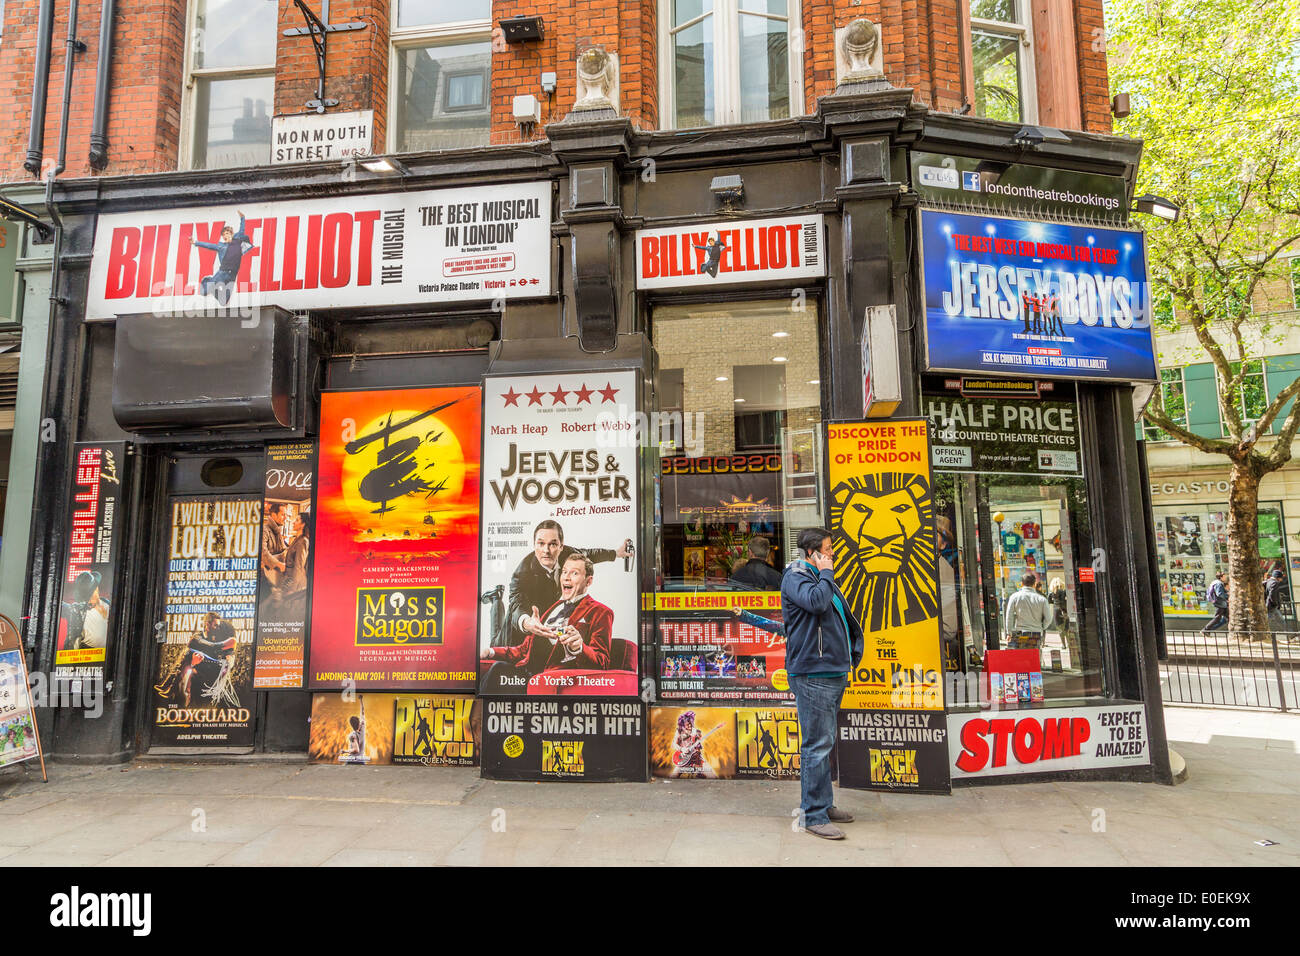 Theatre Advertising hoardings on a corner shop on Monmouth Street London WC2 Stock Photo